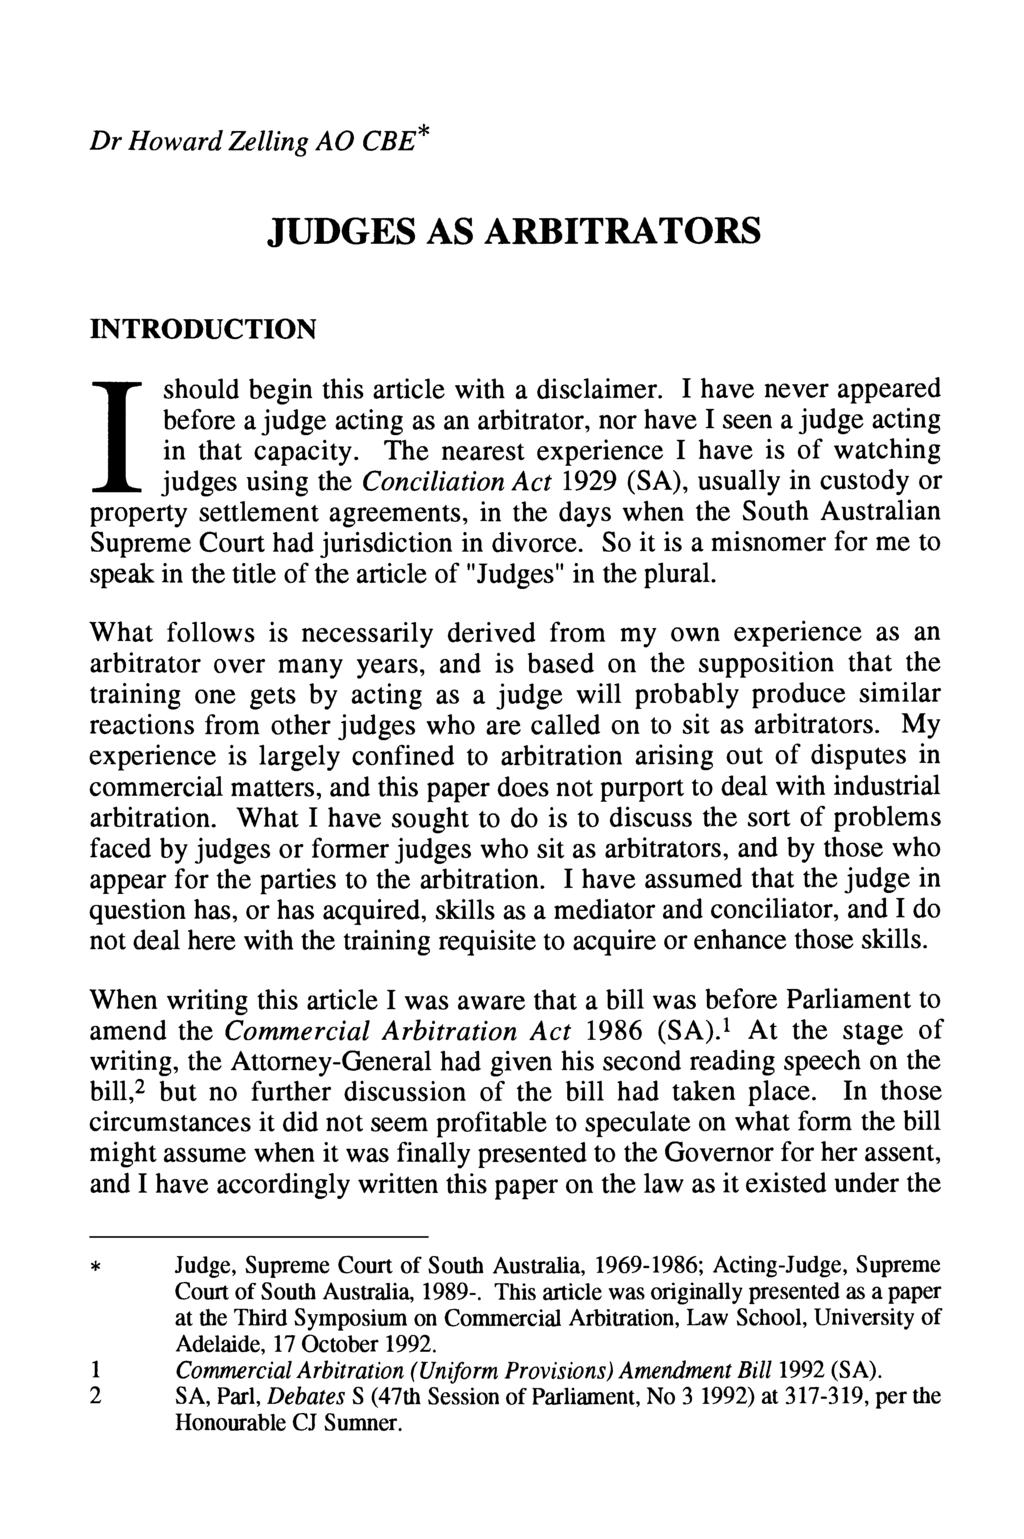 Dr Howard Zelling A0 CBE* JUDGES AS ARBITRATORS INTRODUCTION should begin this article with a disclaimer.